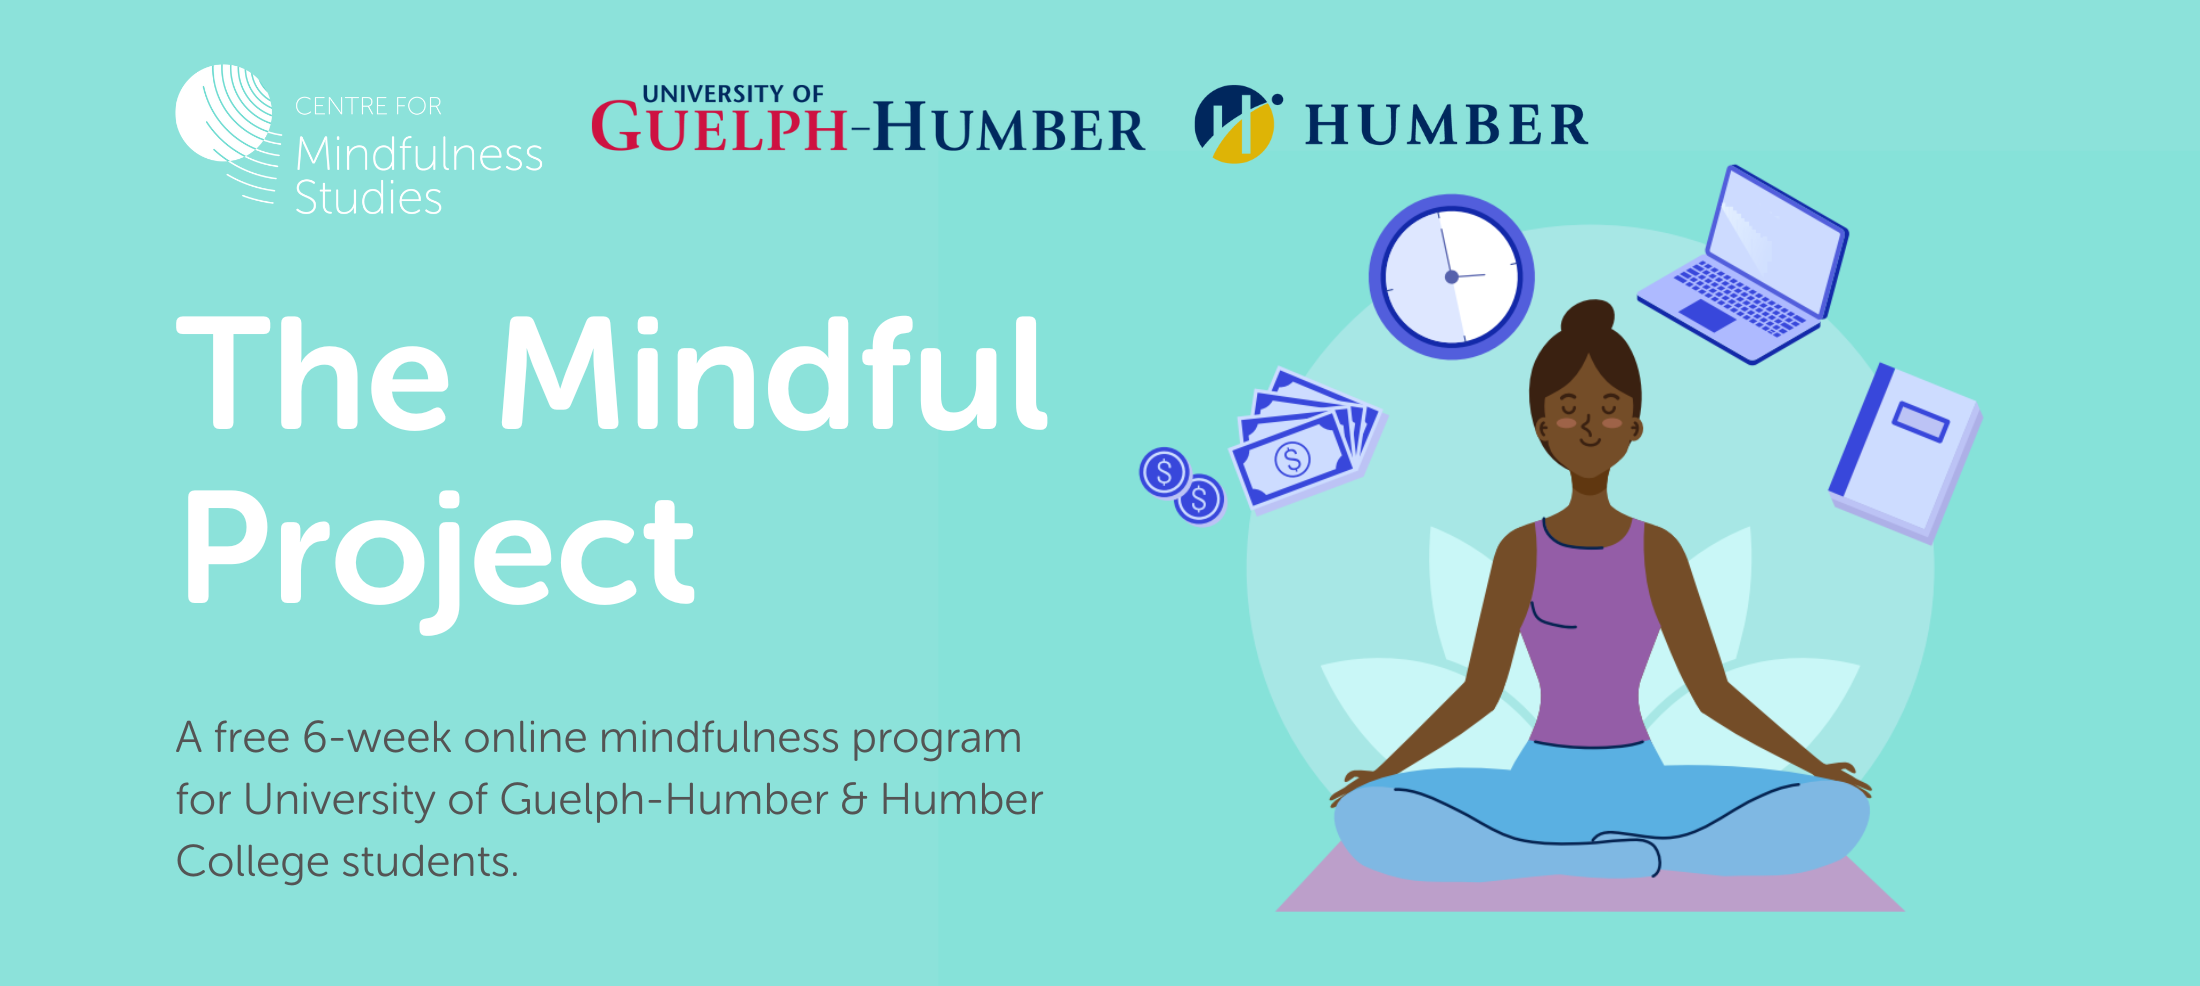 The Mindful Initiative. A free 6-week online mindfulness program for University of Guelph Students! Begins November 10